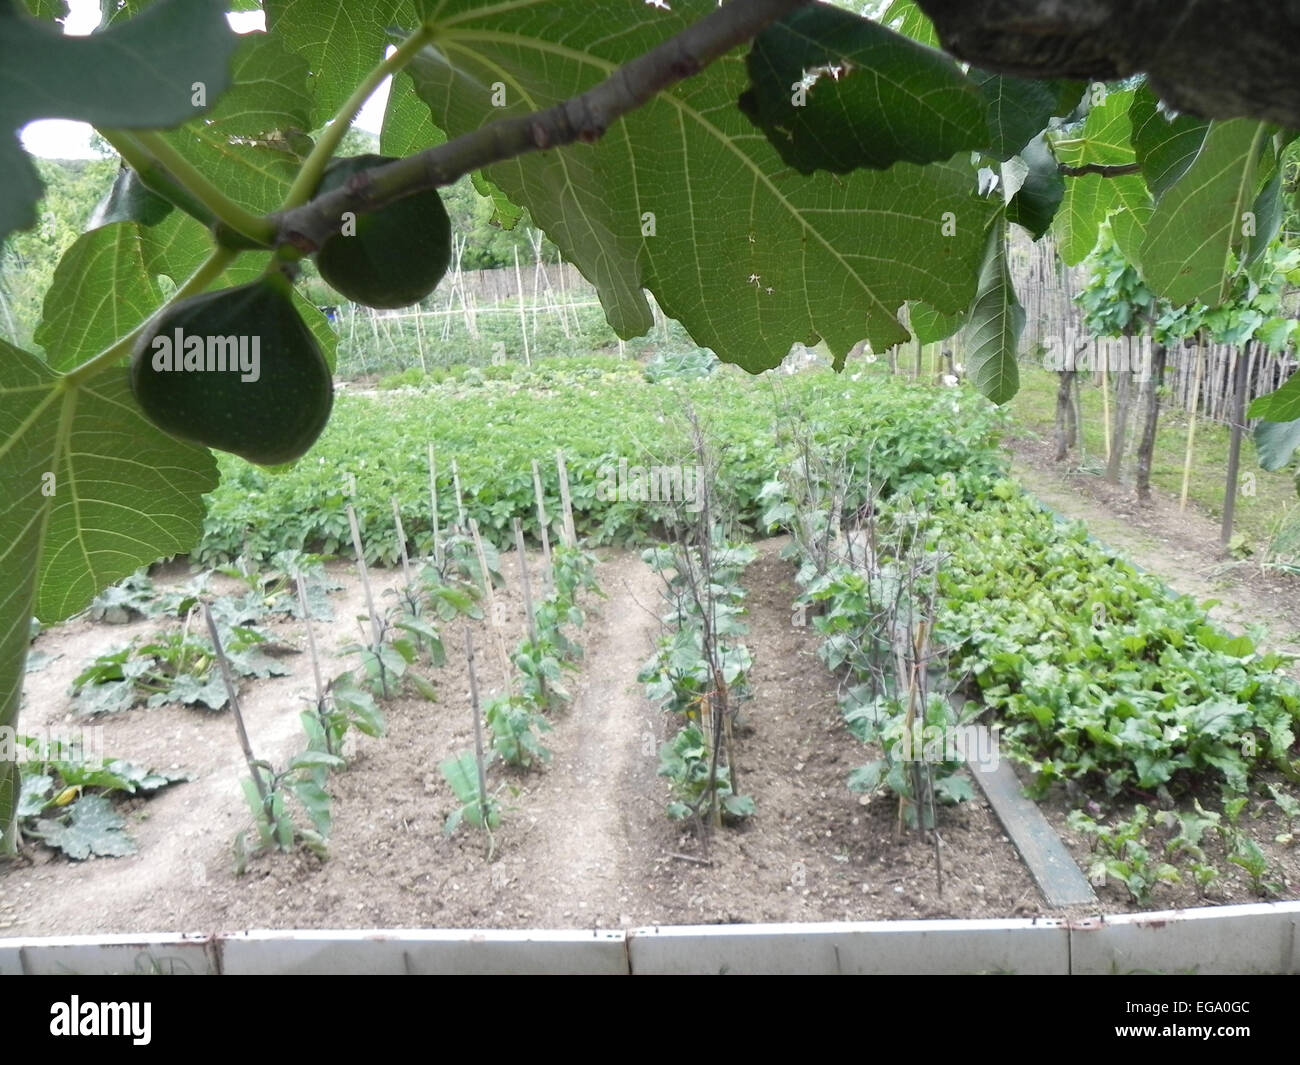 A lush fig tree in a vegetable garden Stock Photo